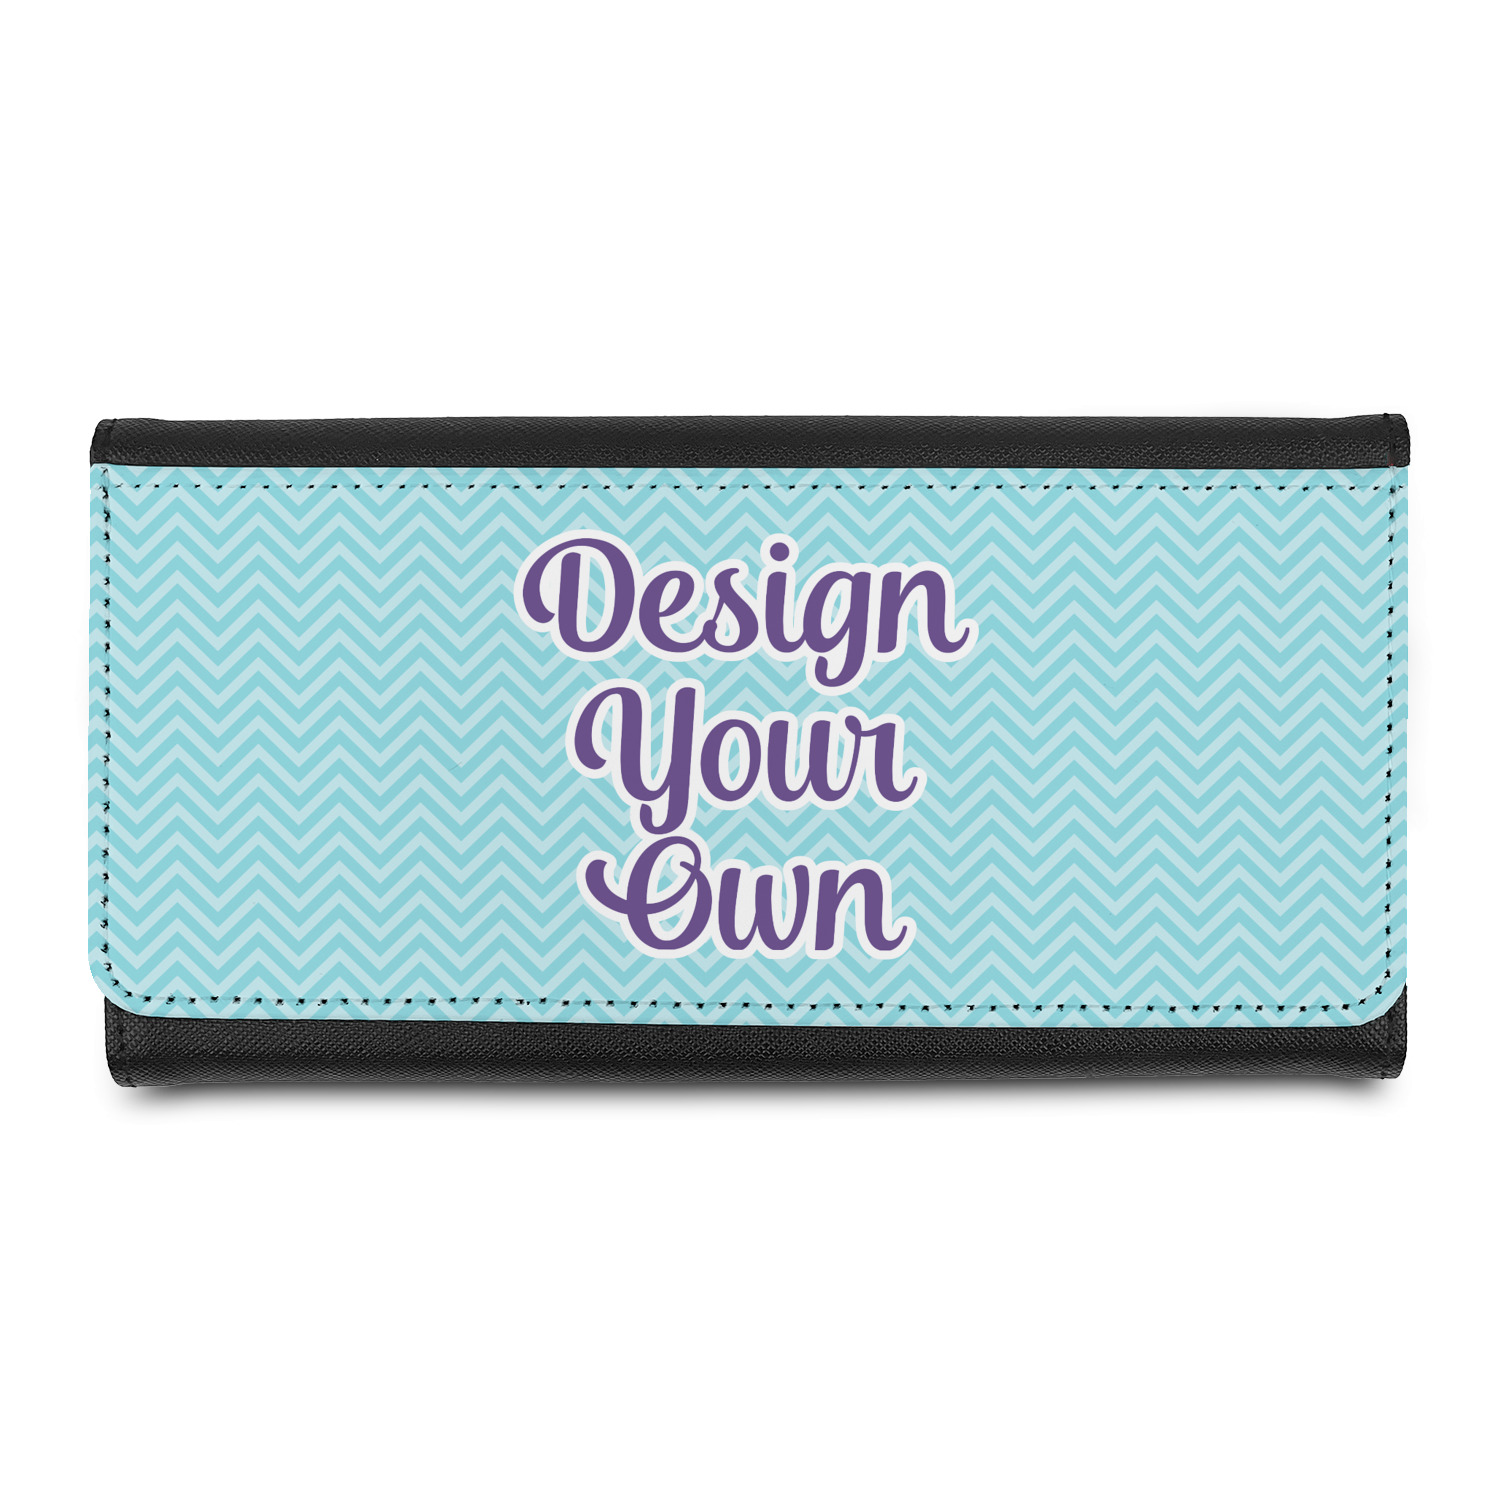 Monogrammed Damask Leatherette Ladies Wallet (Personalized)